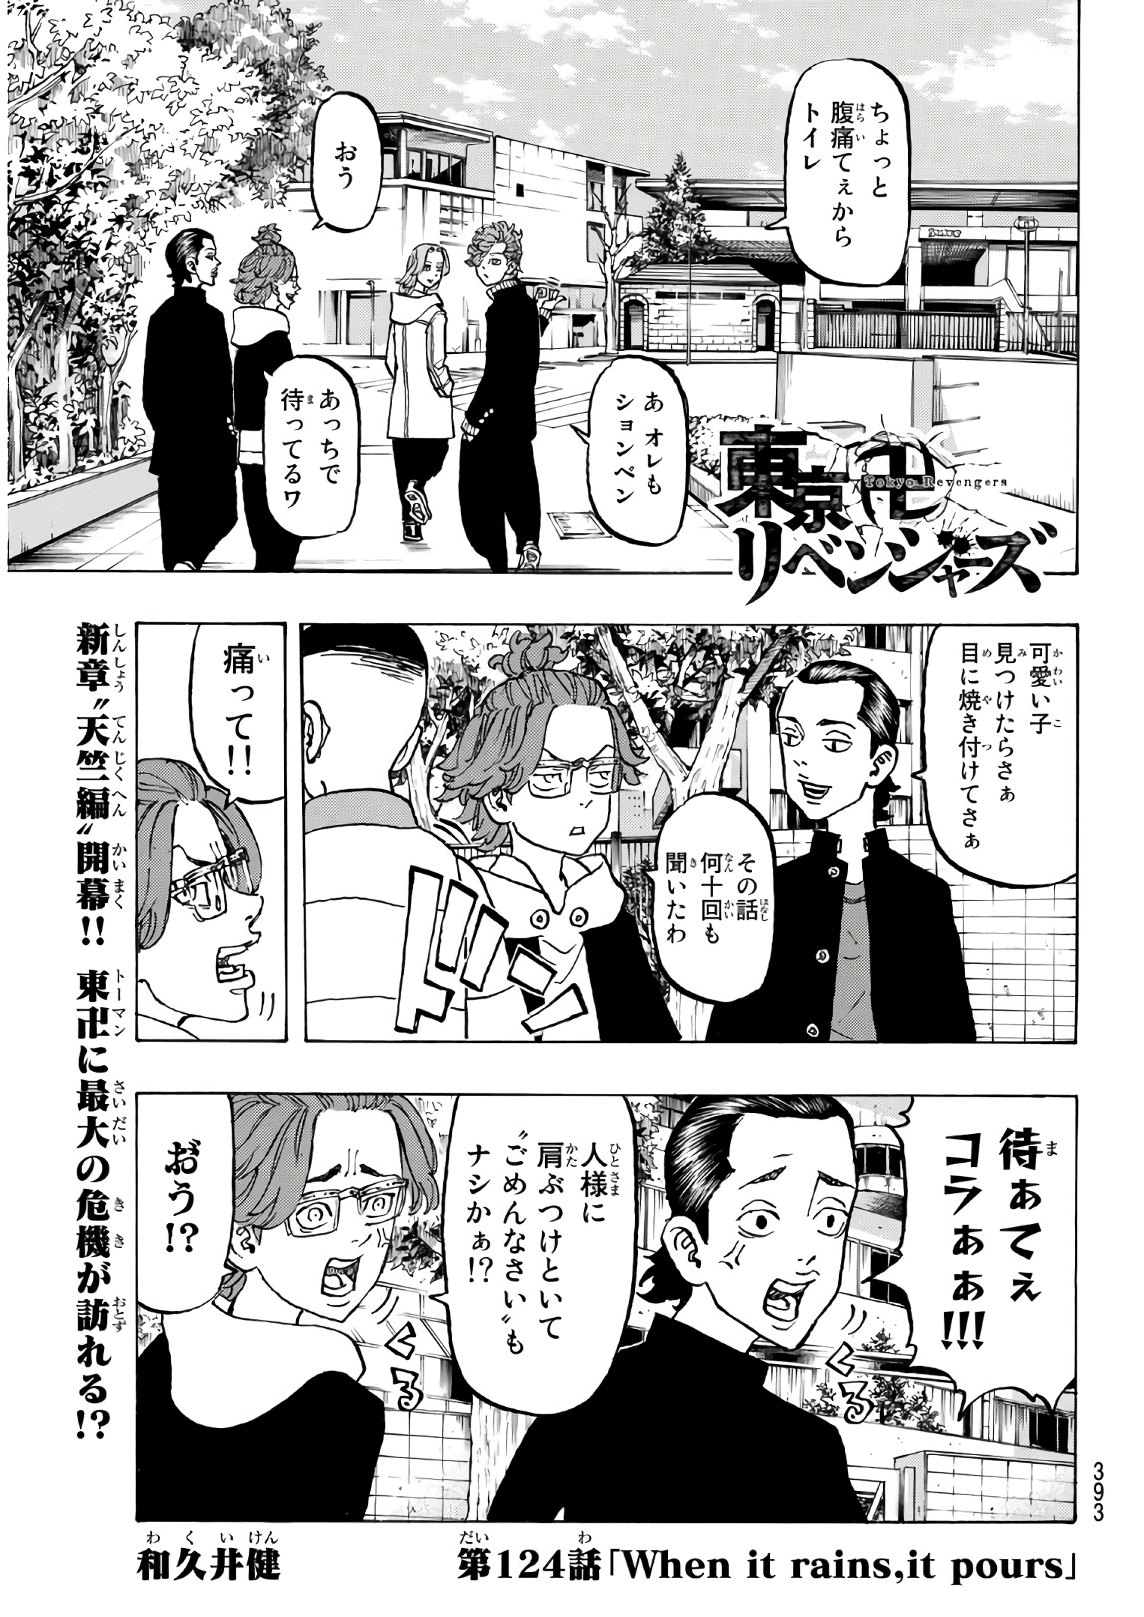 Tokyo Revengers Chapter 250 Raw Scans: Shion is Knocked by Akkun!